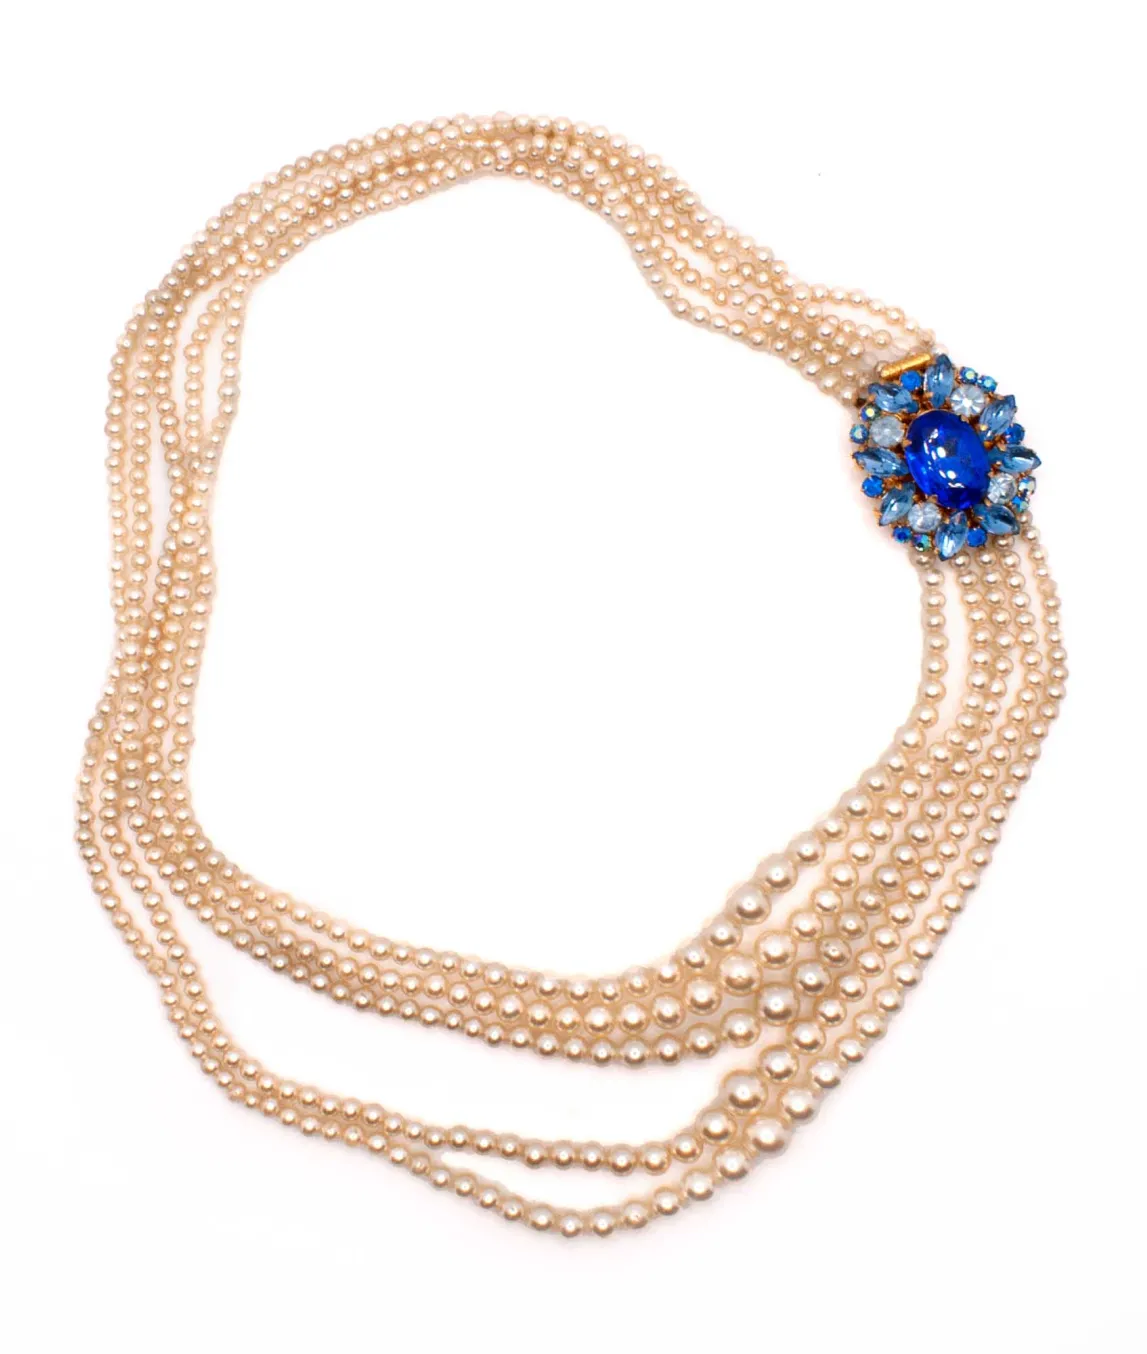 Vintage Multi-strand Faux Pearl Necklace with Decorative Blue Clasp